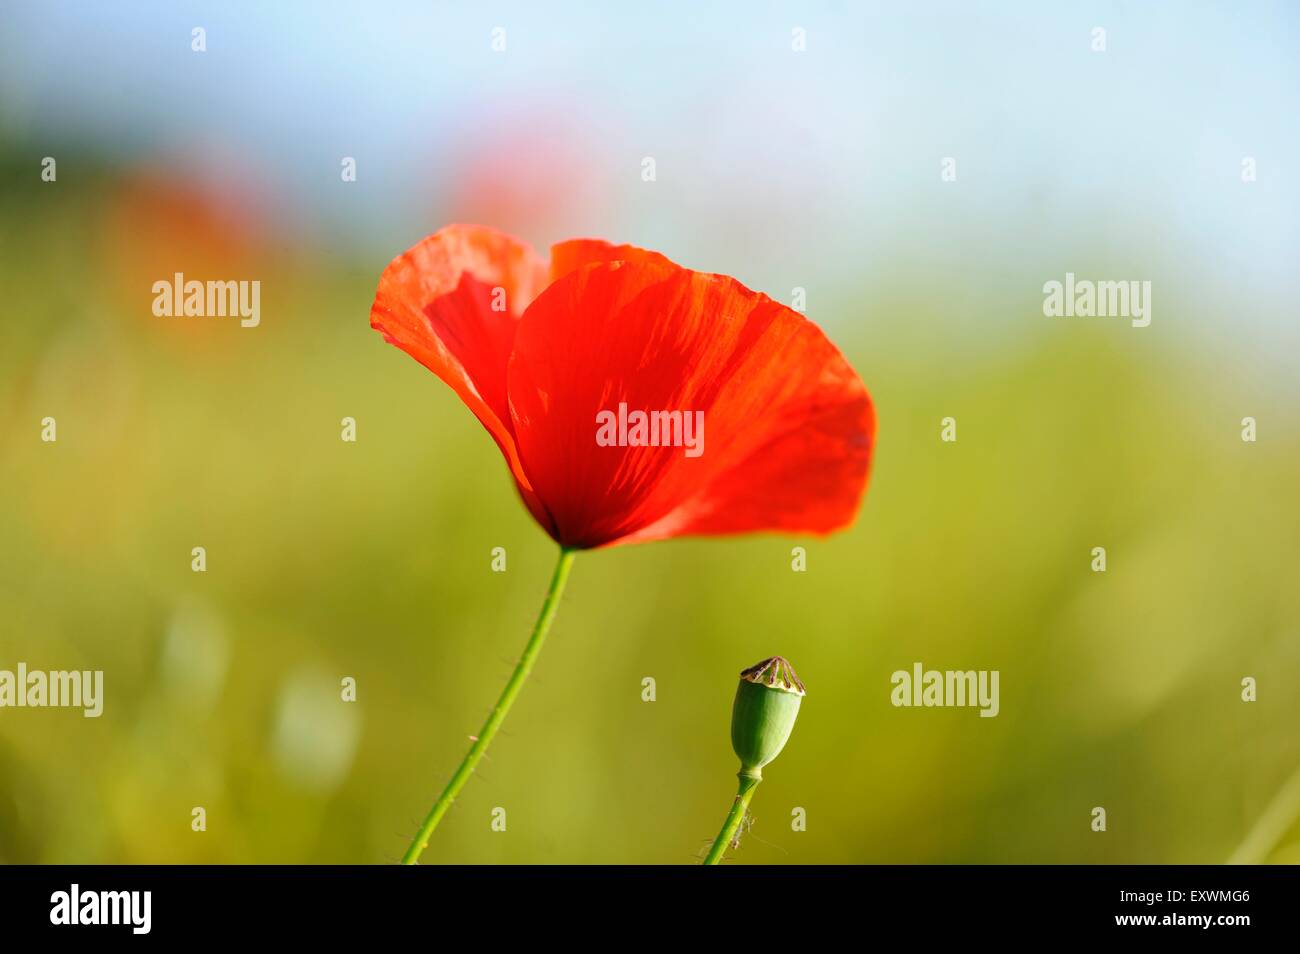 Corn poppies in a field Stock Photo